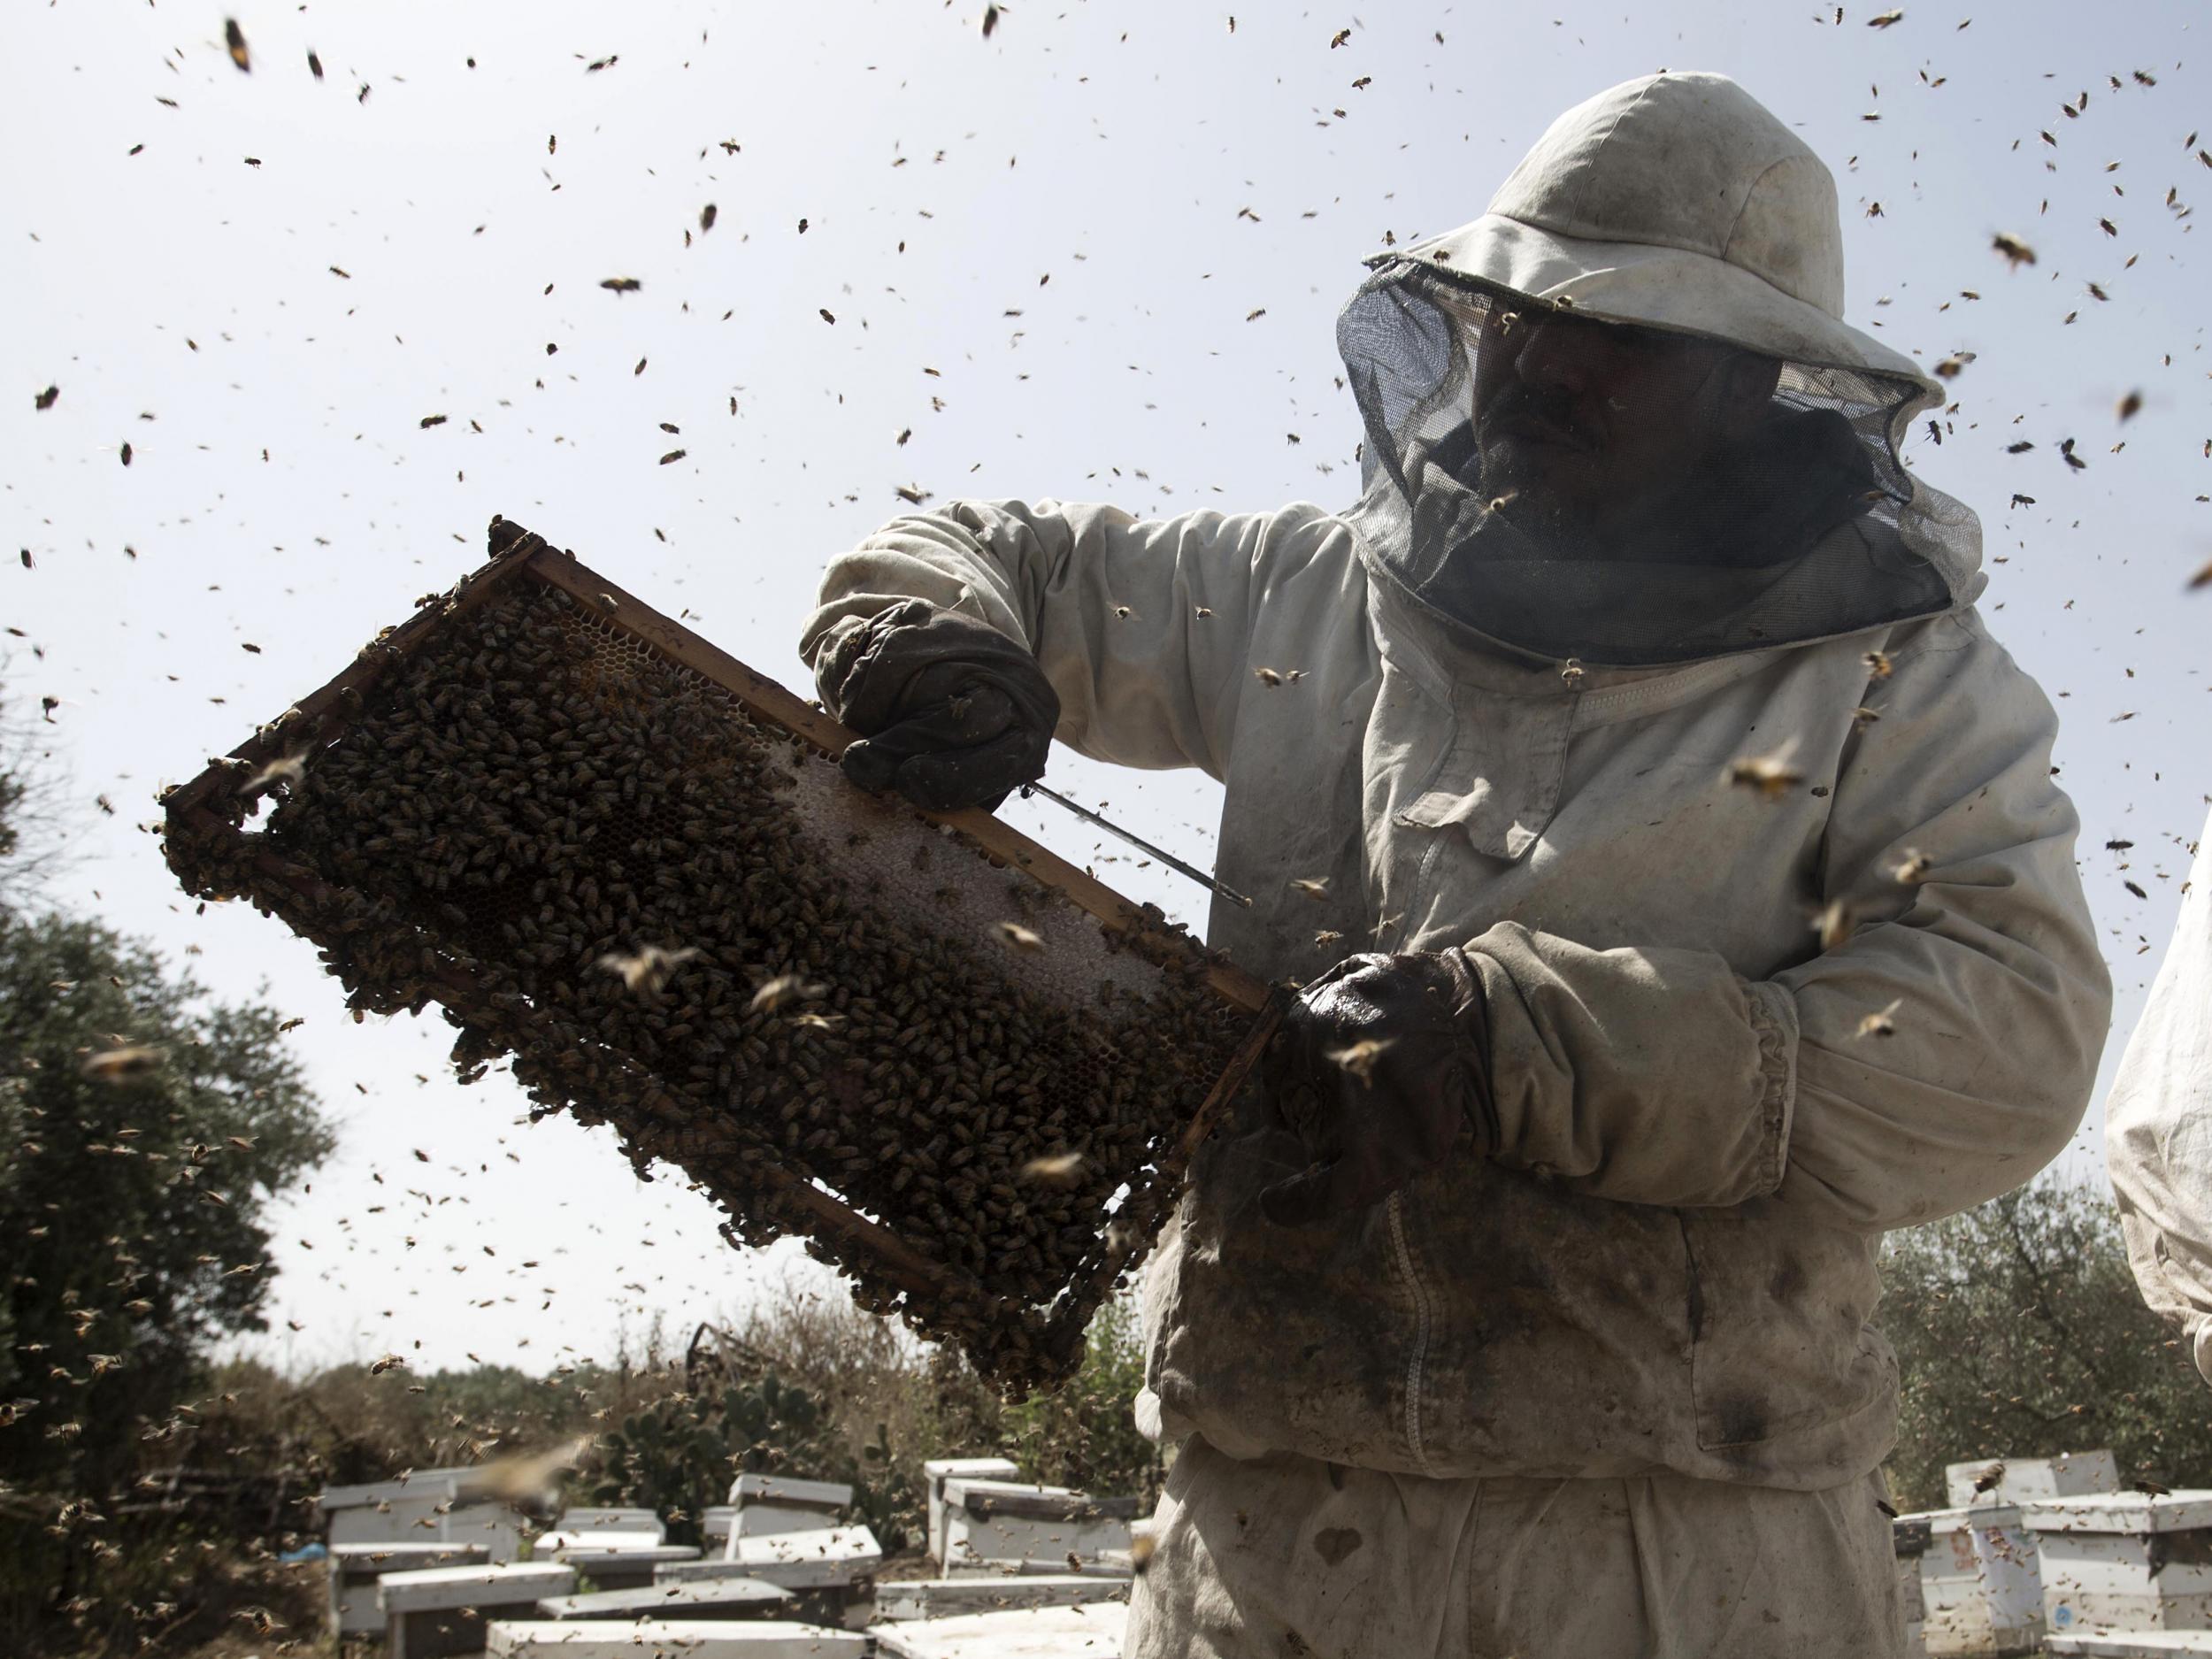 Beekeepers have been unable to stop the spread of mites that carry bee-killing viruses